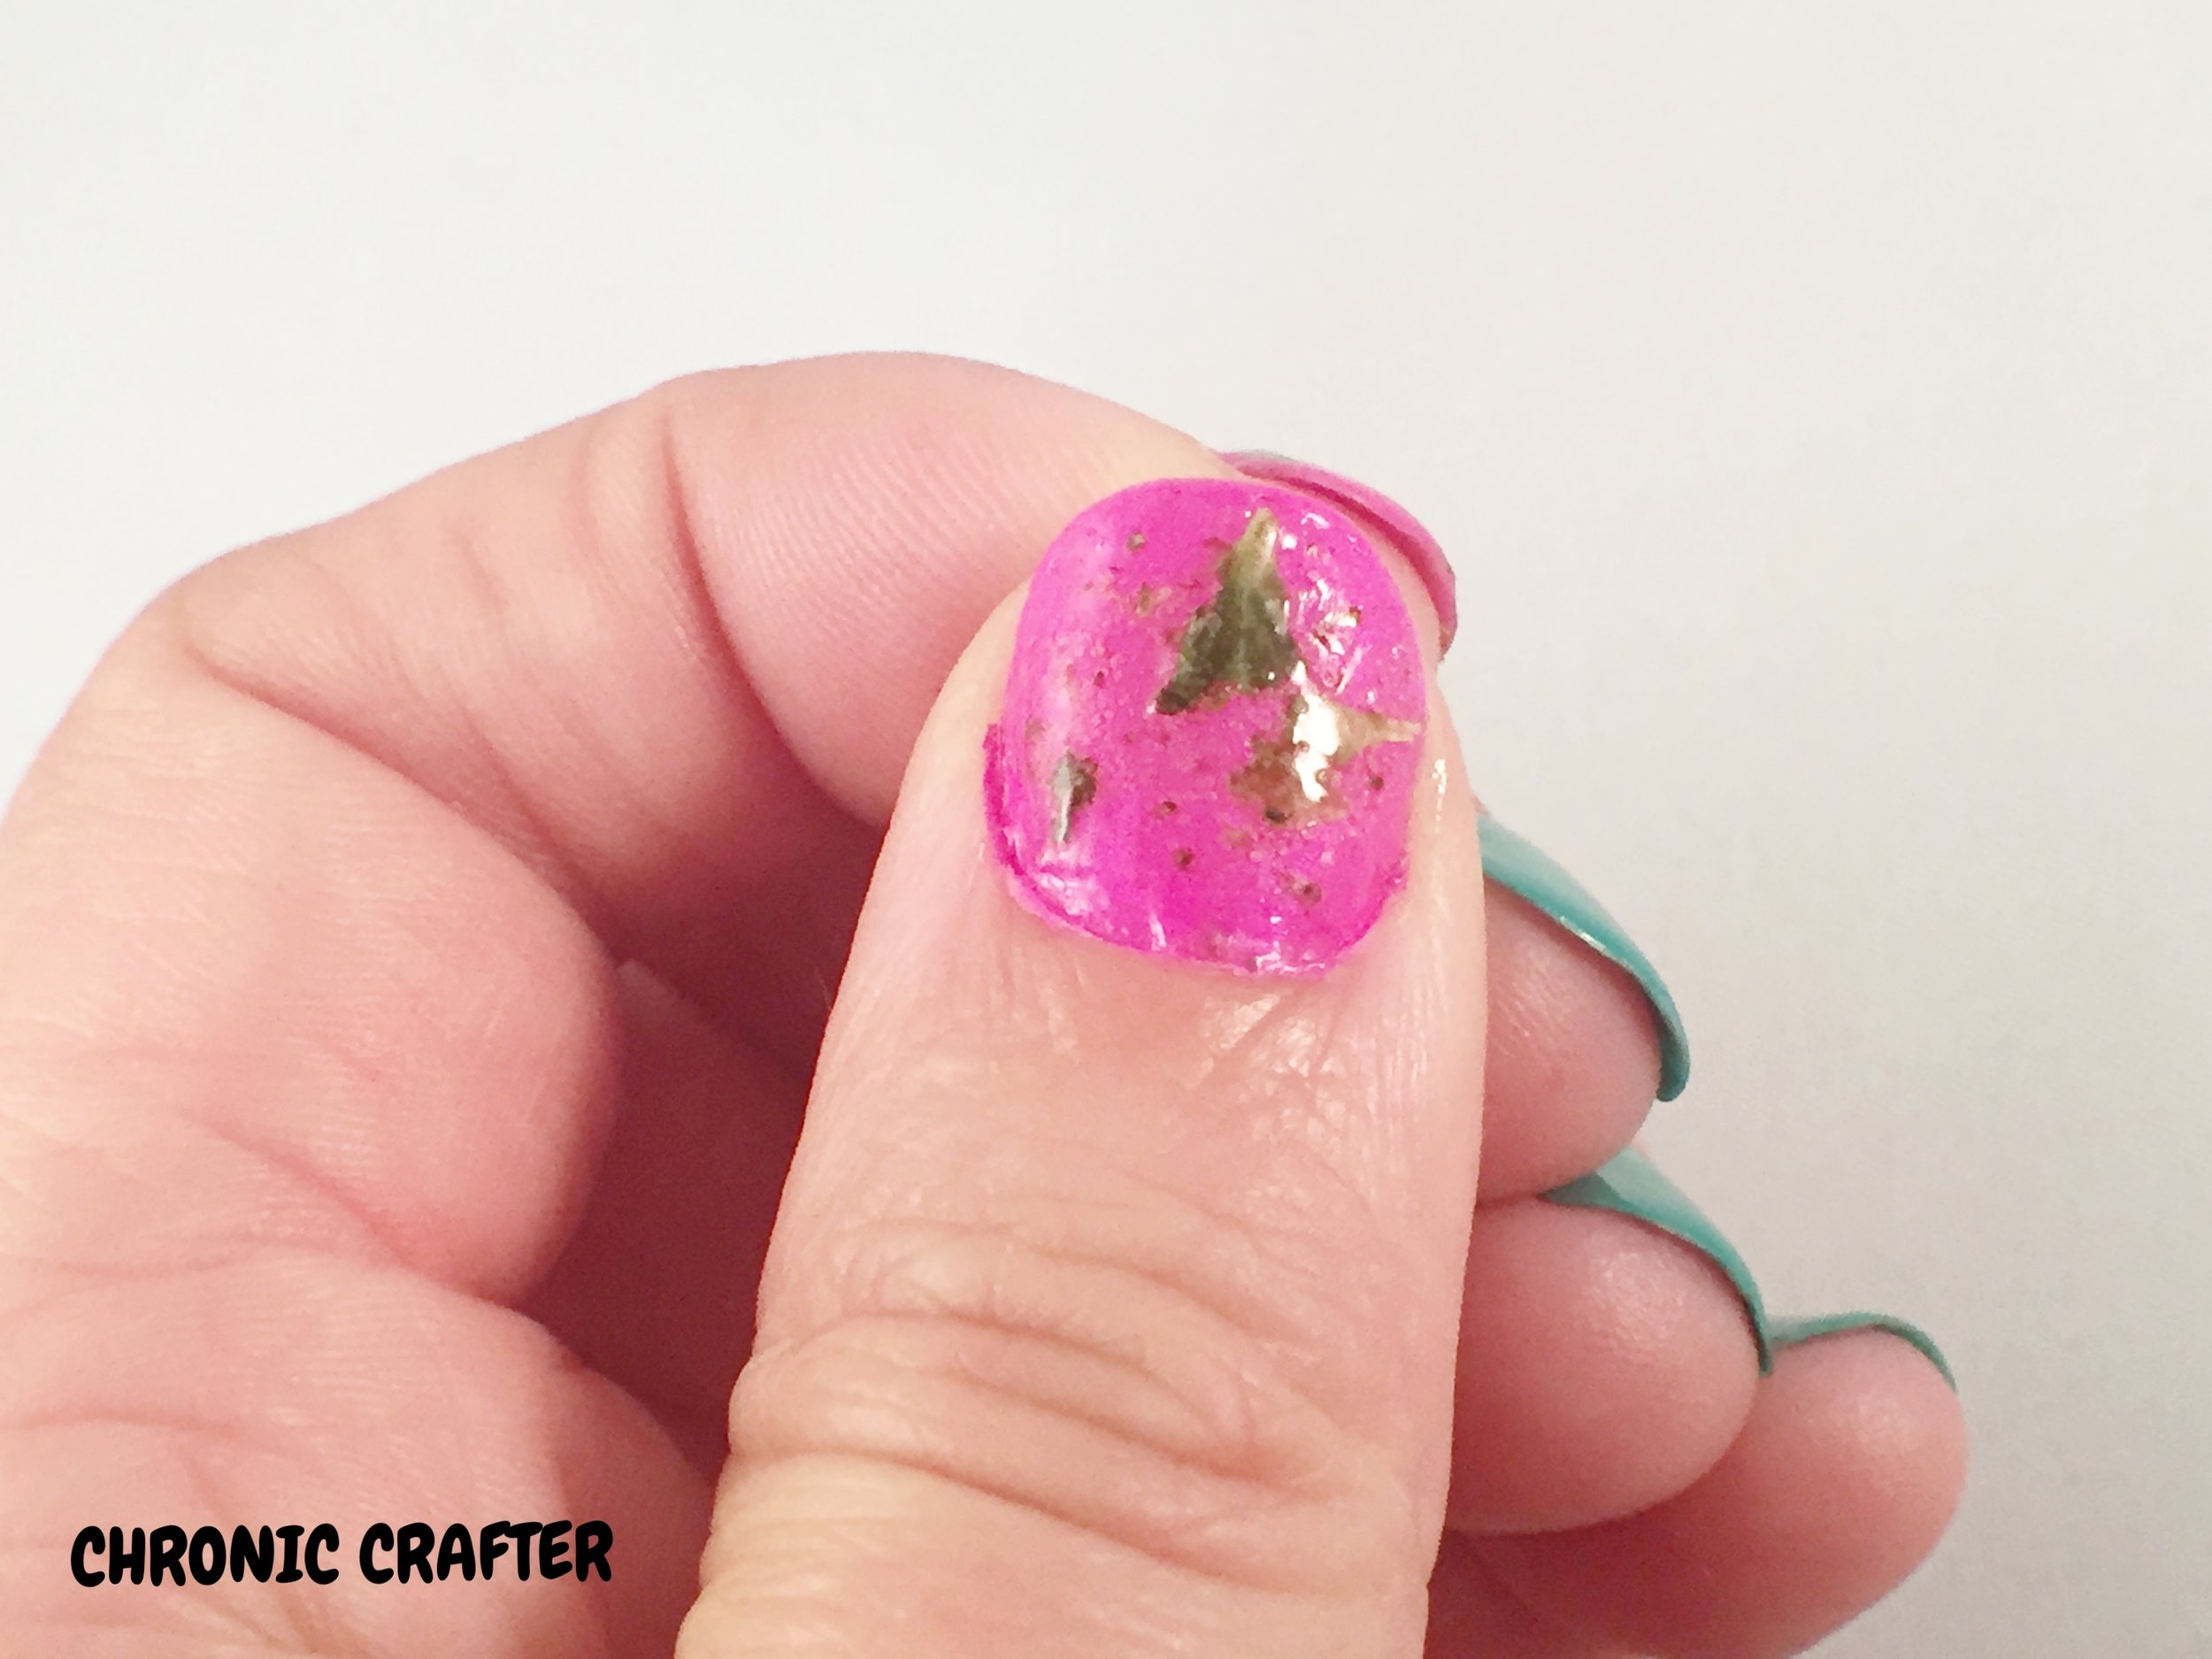 1. "How to Create Weed Nail Art: Step-by-Step Tutorial" - wide 8